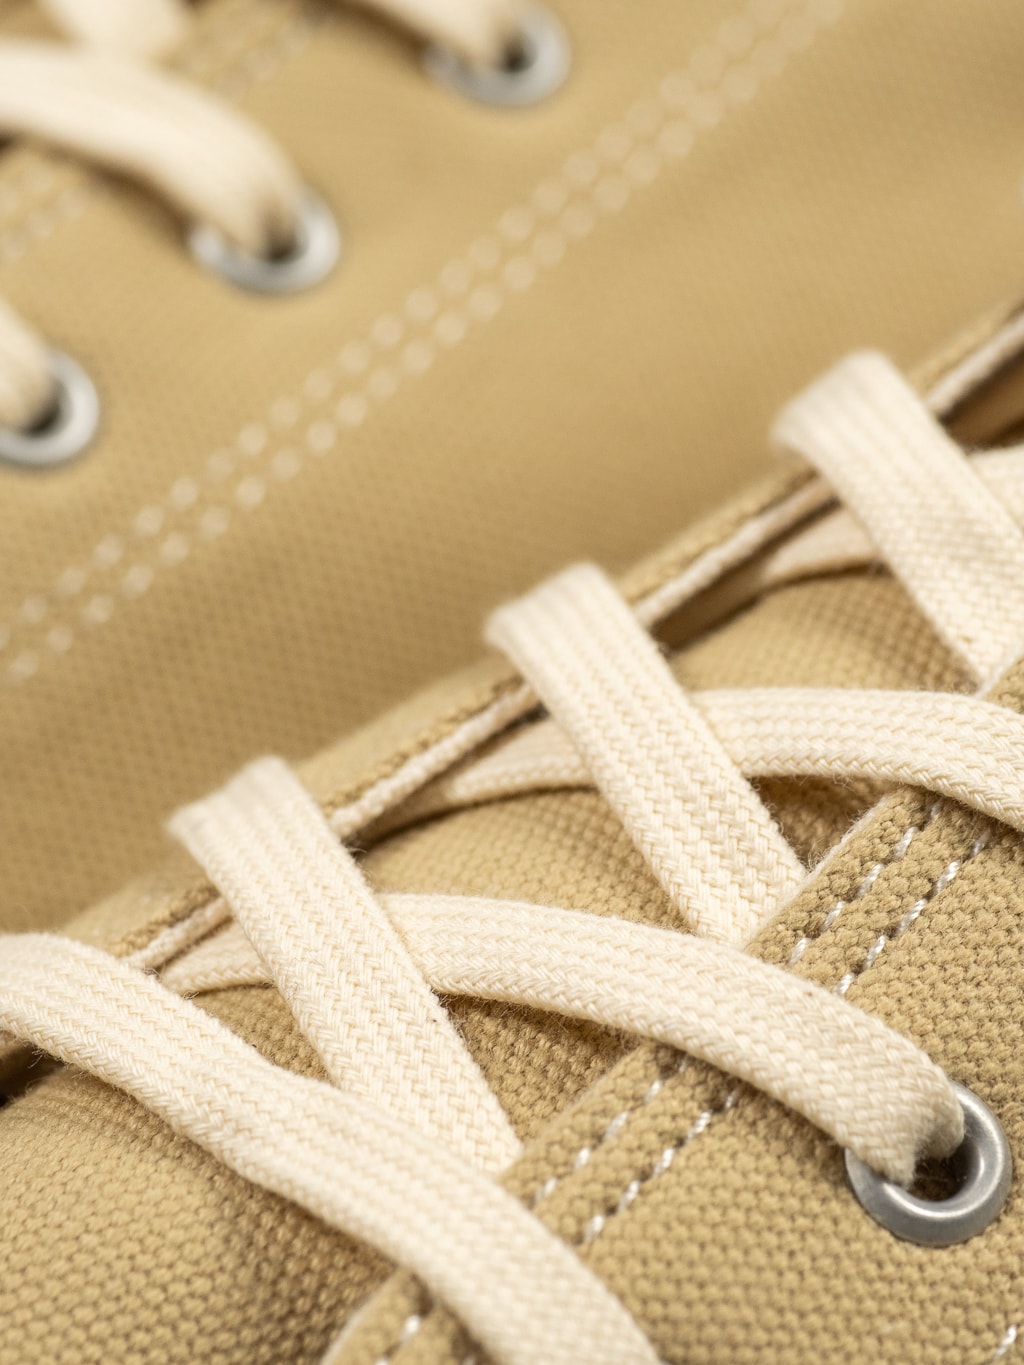 Shoes like pottery low beige sneakers laces